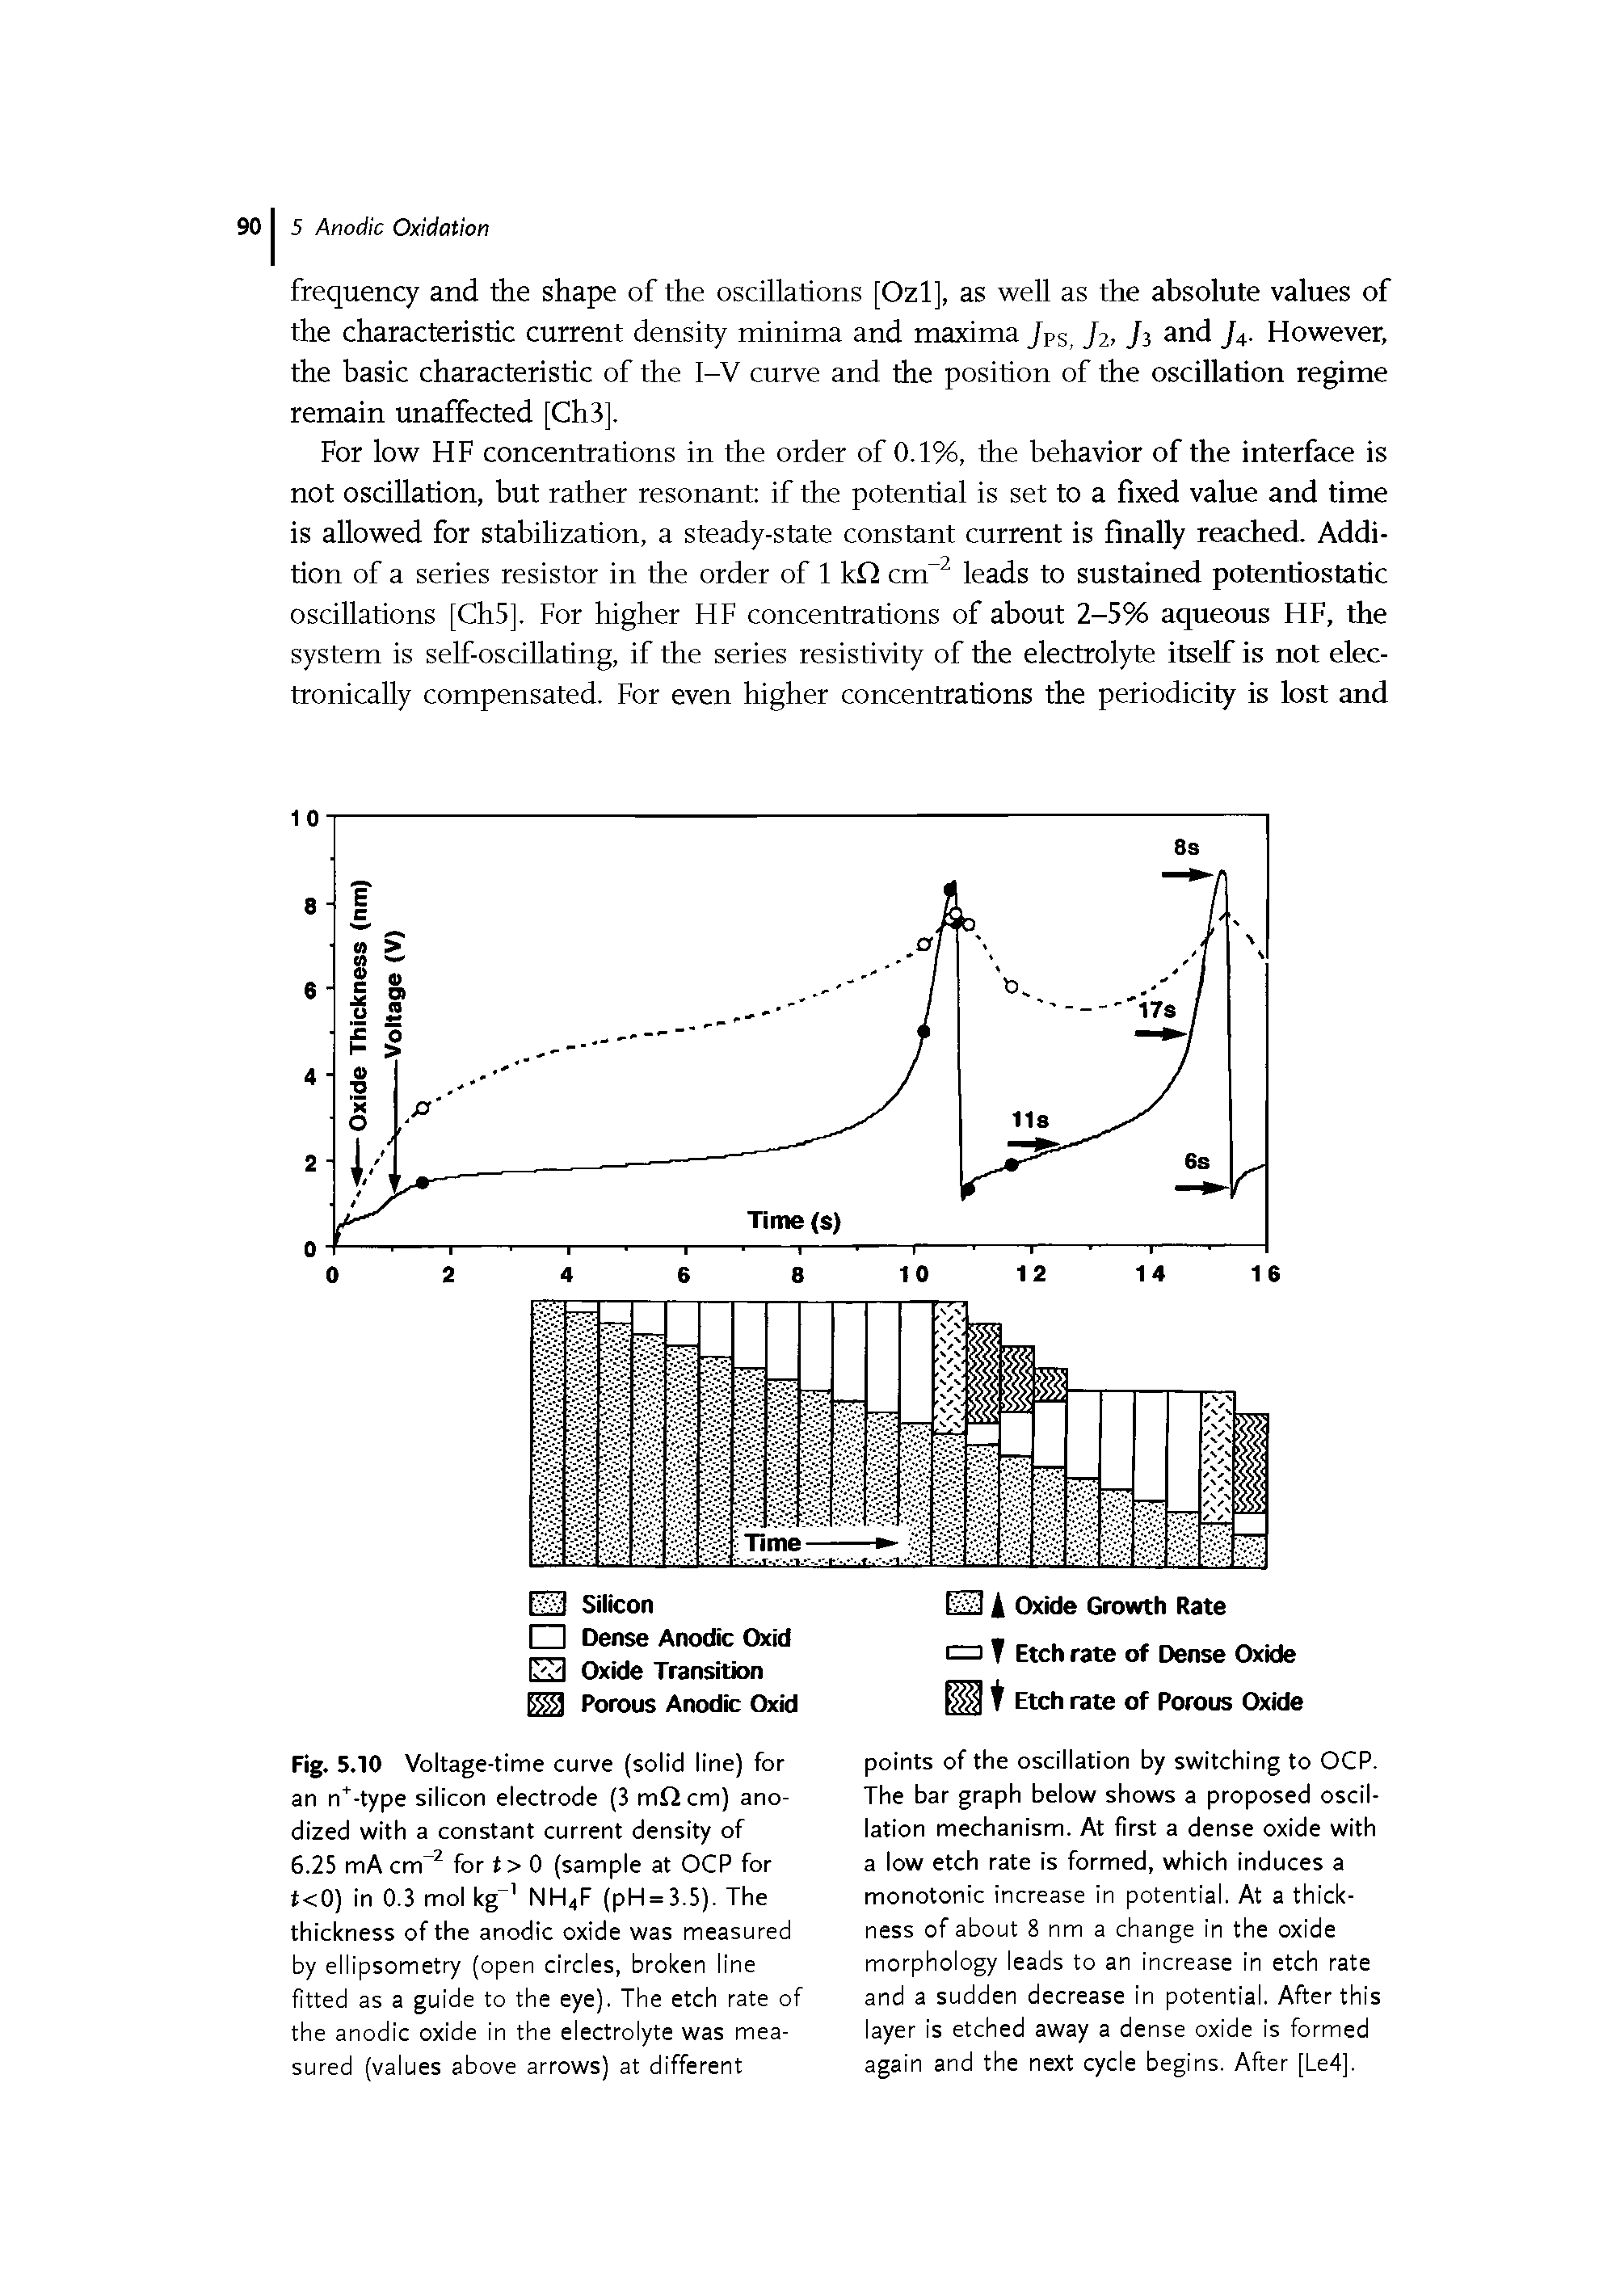 Fig. 5.10 Voltage-time curve (solid line) for an n -type silicon electrode (3 mficm) anodized with a constant current density of 6.25 mA crrf2 for t> 0 (sample at OCP for t<0) in 0.3 mol kg- NH4F (pH = 3.5). The thickness of the anodic oxide was measured by ellipsometry (open circles, broken line fitted as a guide to the eye). The etch rate of the anodic oxide in the electrolyte was measured (values above arrows) at different...